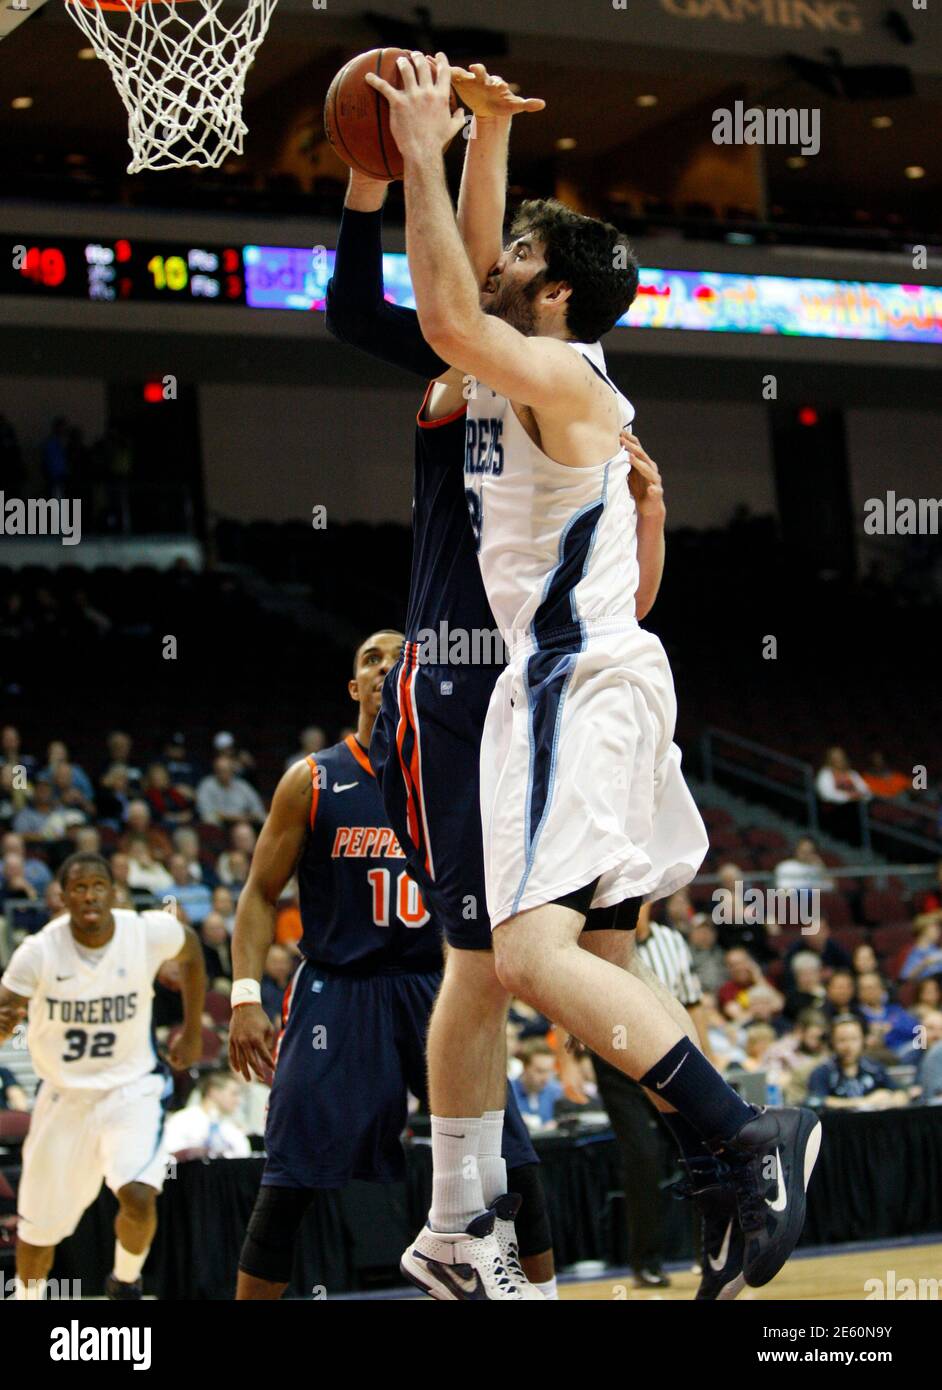 San Diego Toreros' Chris Manresa (R) is fouled by Pepperdine Waves' Corbin Moore during their West Coast Conference Championships basketball game at the Orleans Arena in Las Vegas, Nevada March 1, 2012.  REUTERS/Steve Marcus (UNITED STATES - Tags: SPORT BASKETBALL) Stock Photo